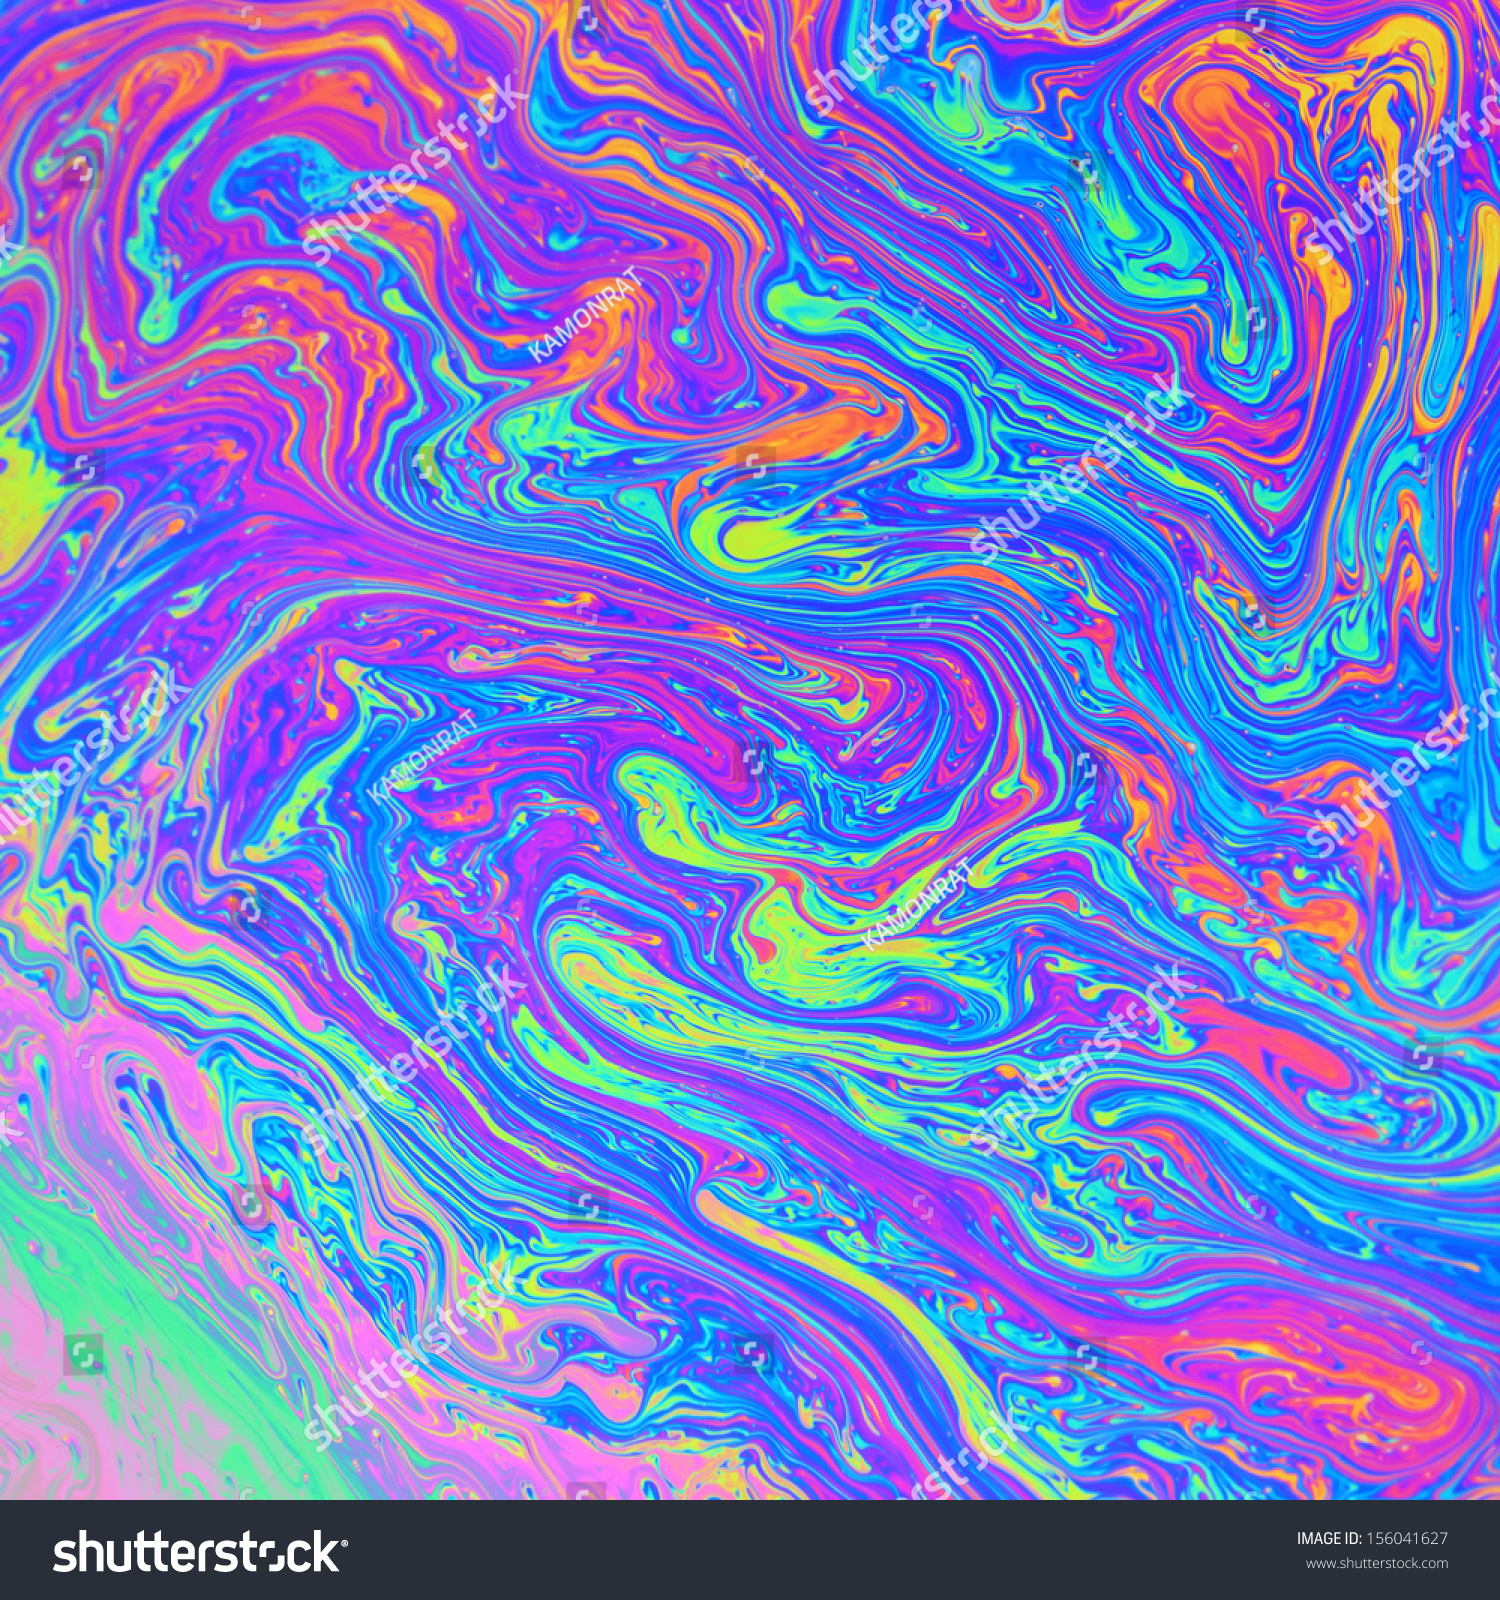 Rainbow Colors Created By Soap Bubble Stock Photo (Edit Now ...